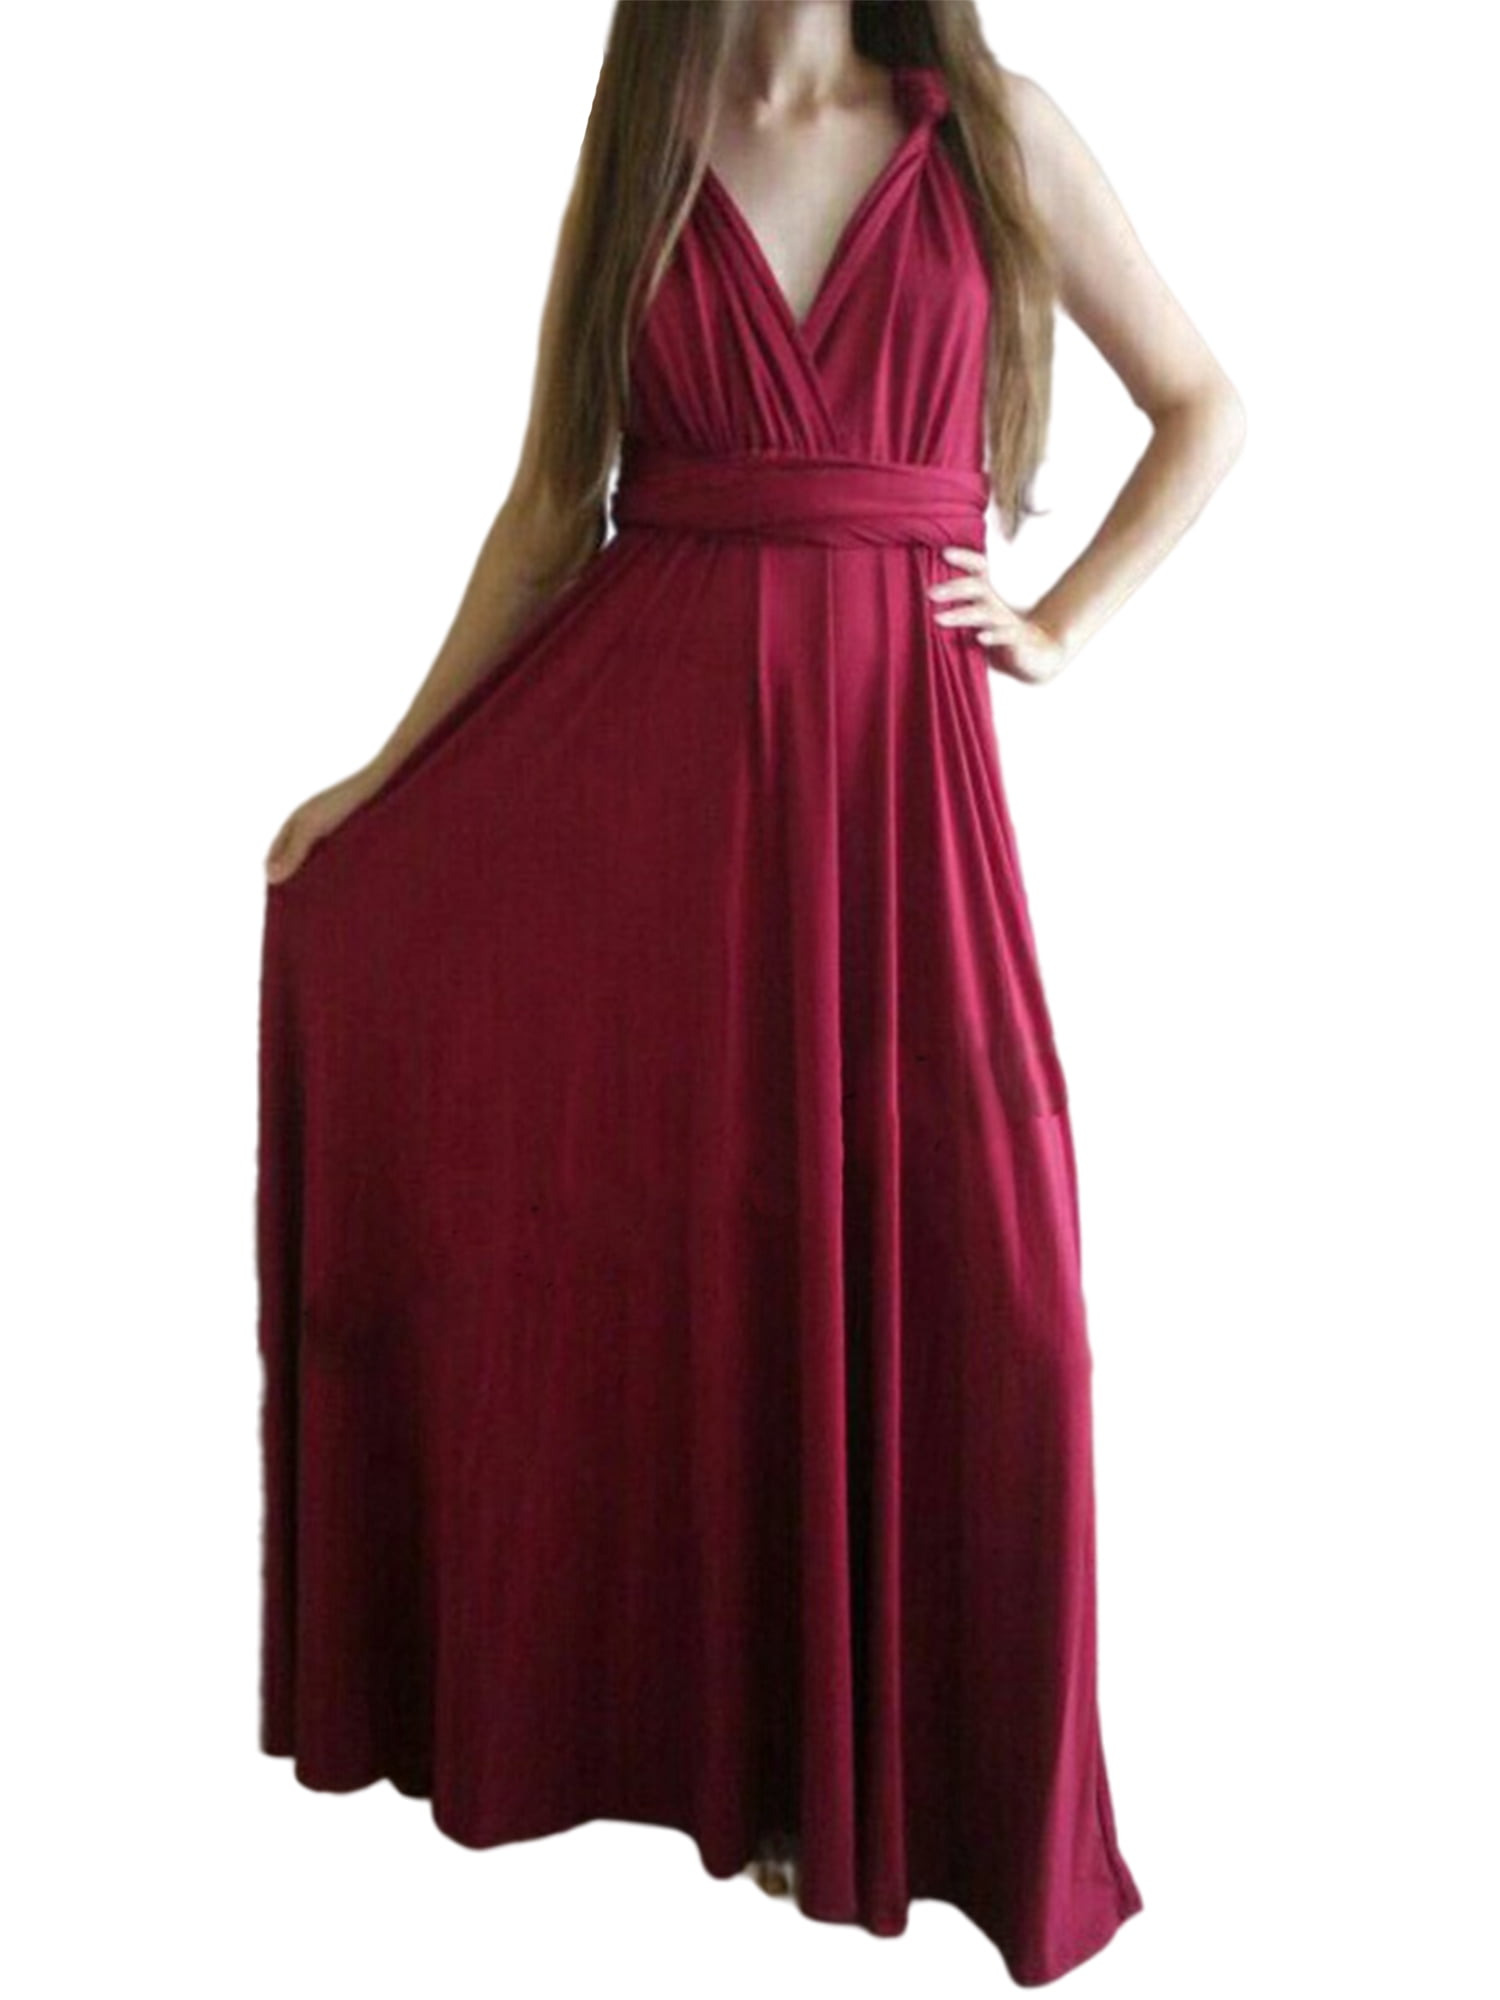 Lady Sleeveless Long Dress Multi Way Wrap Bridesmaid Formal Evening Party Gown 